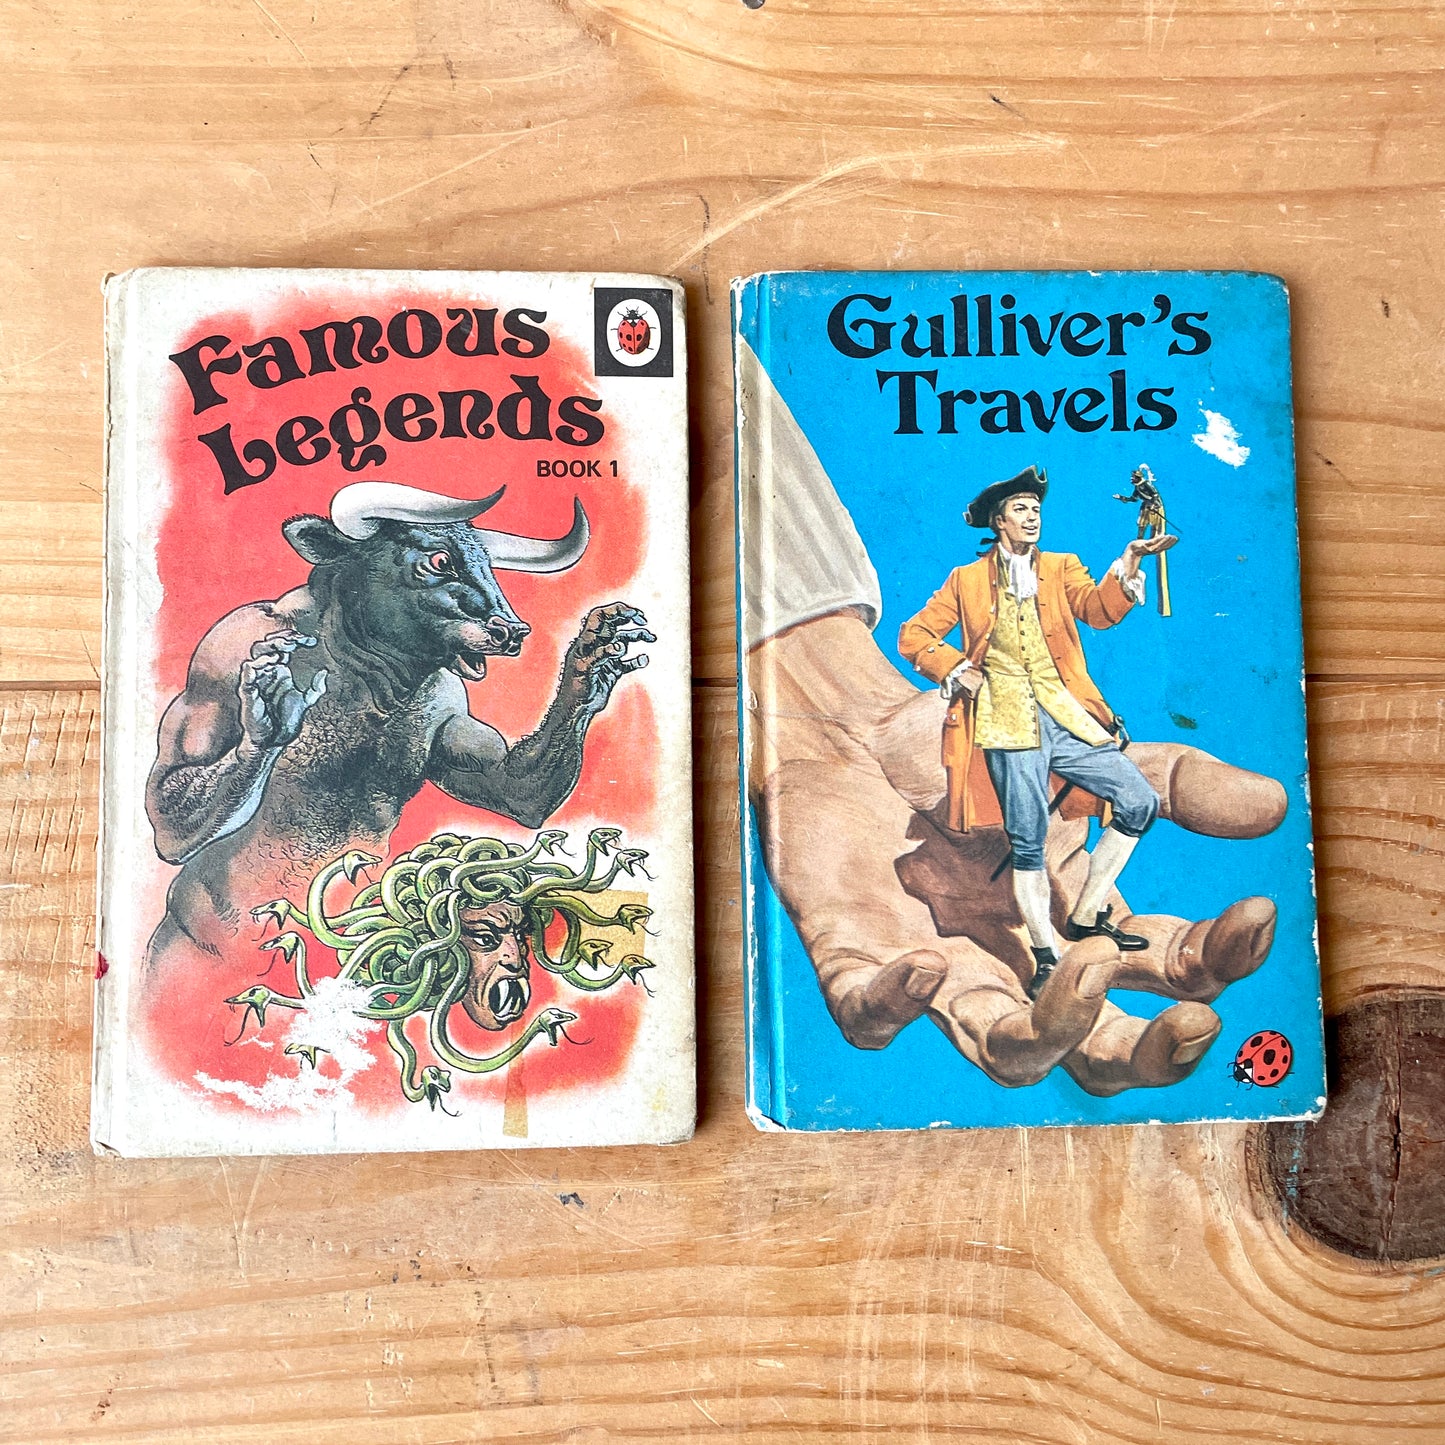 Pair of Vintage Ladybird books Famous Legends & Gulliver's Travels